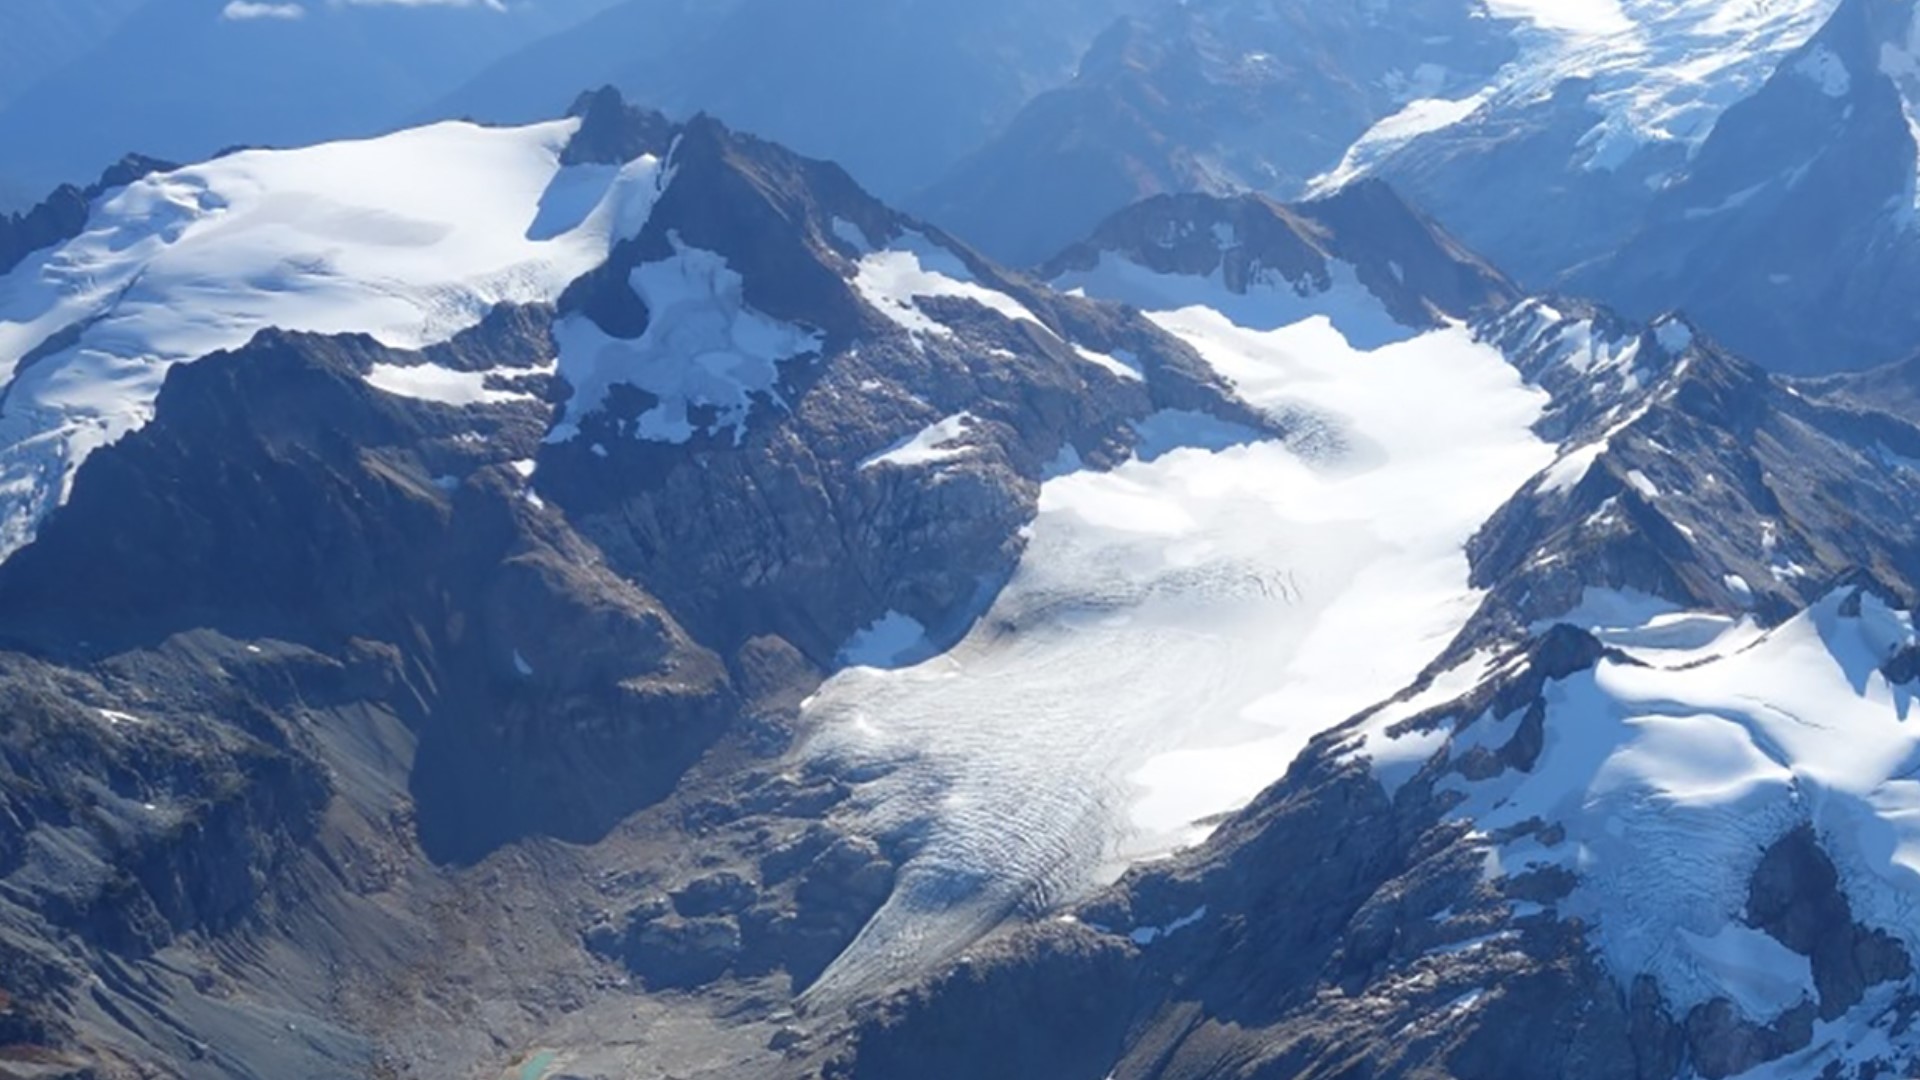 The South Cascade Glacier is shrinking by about 2 feet per year, according to the latest research.